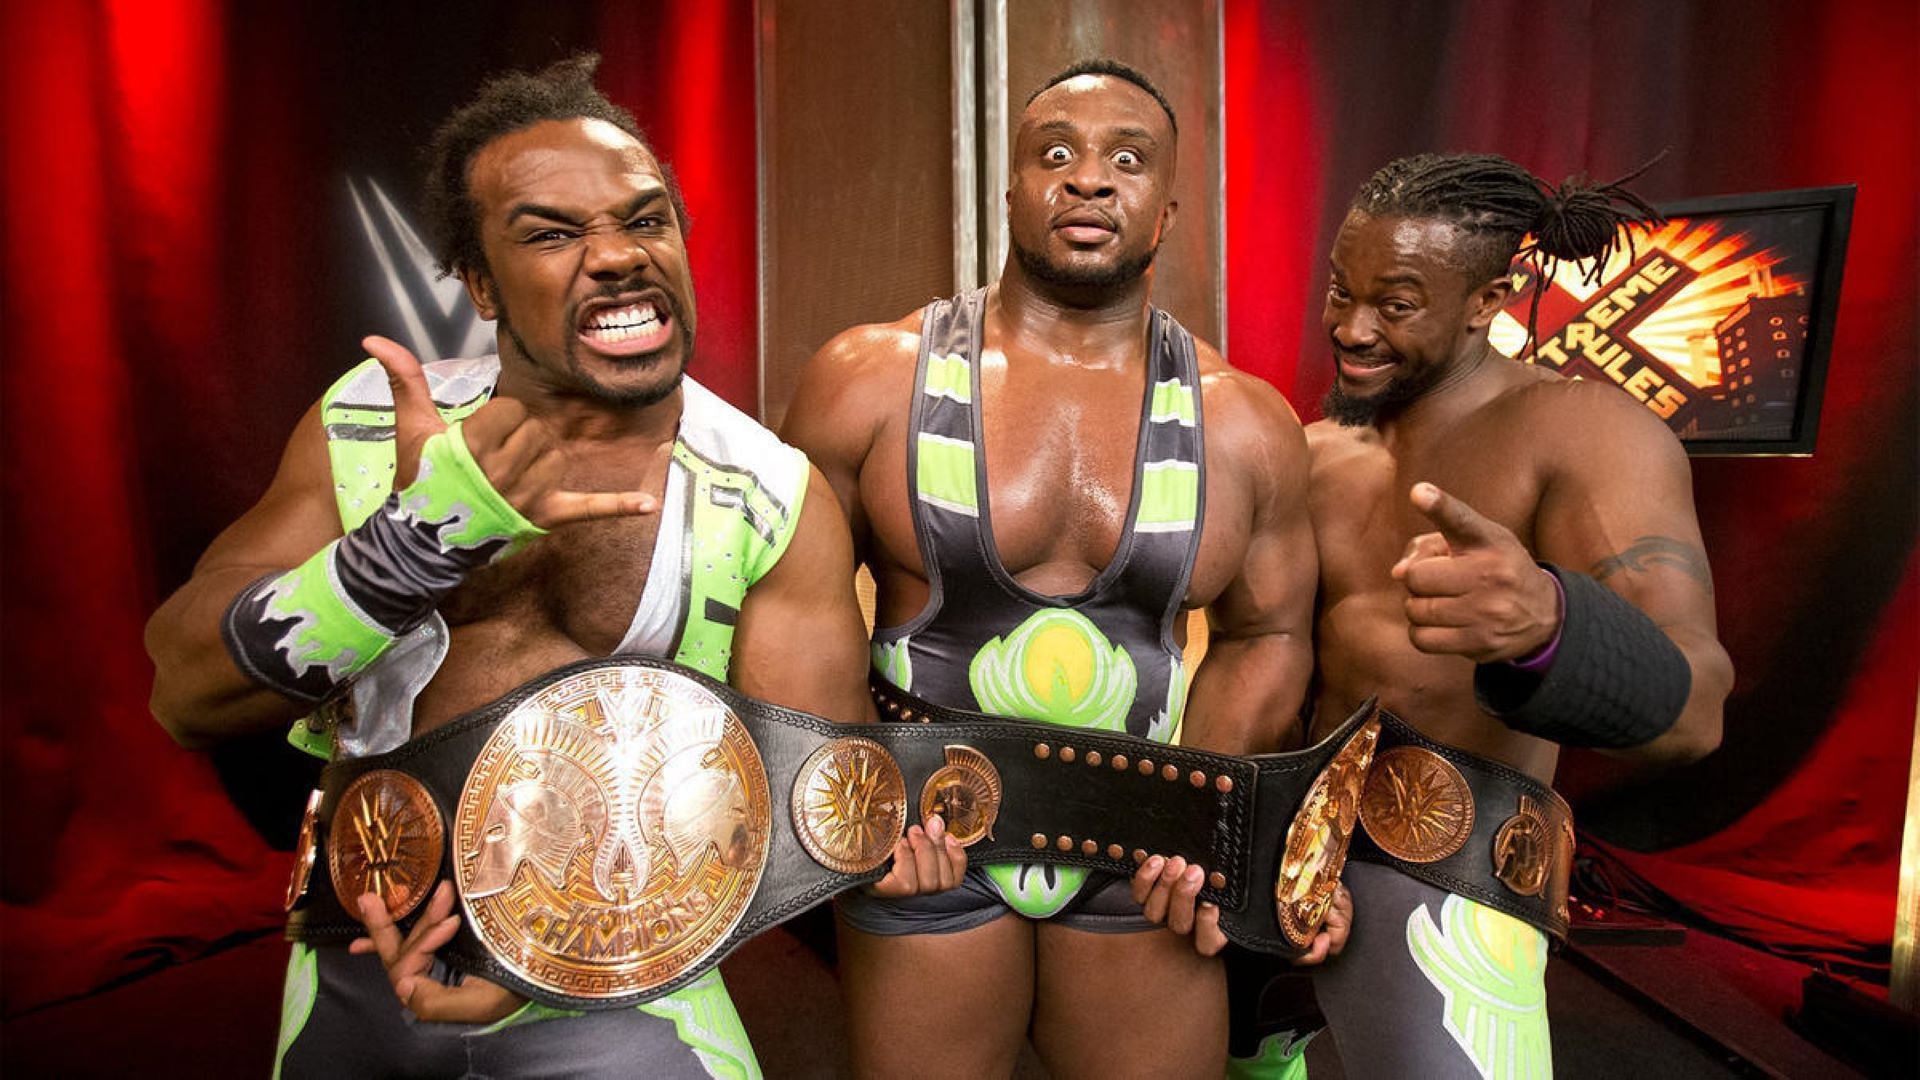 The New Day is one of the most successful factions in WWE history.